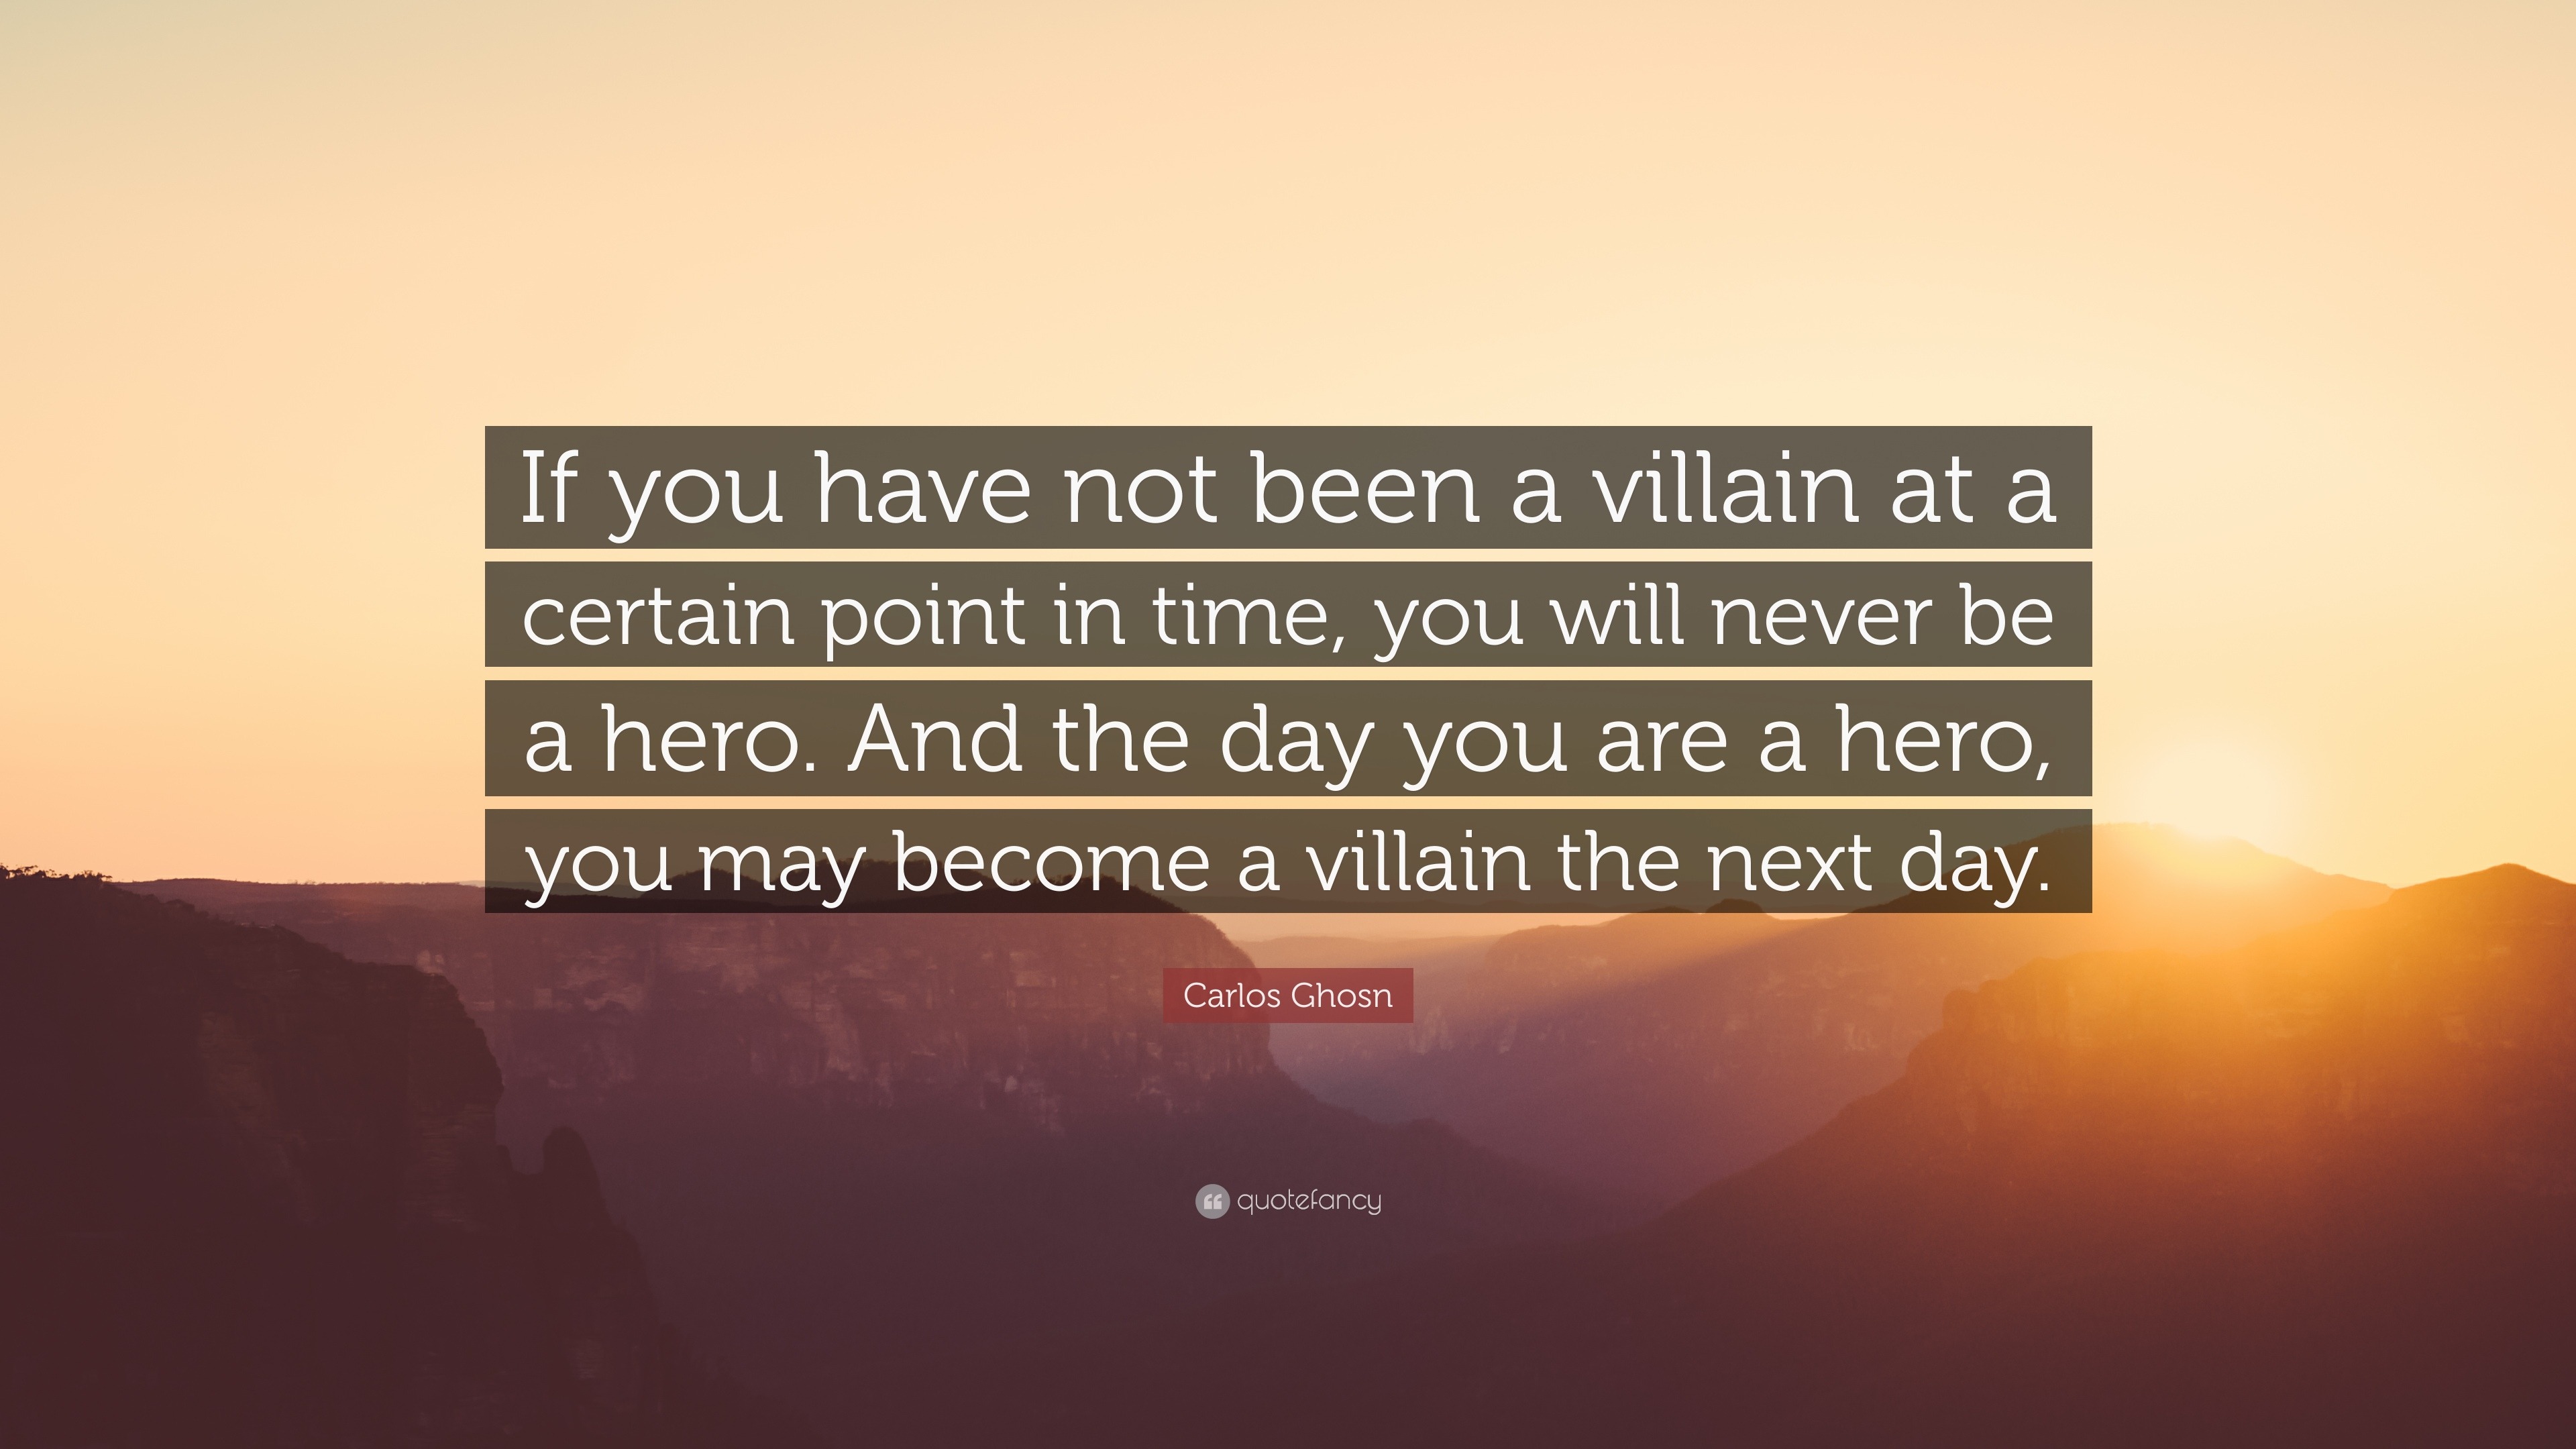 Carlos Ghosn Quote: “If you have not been a villain at a certain point ...